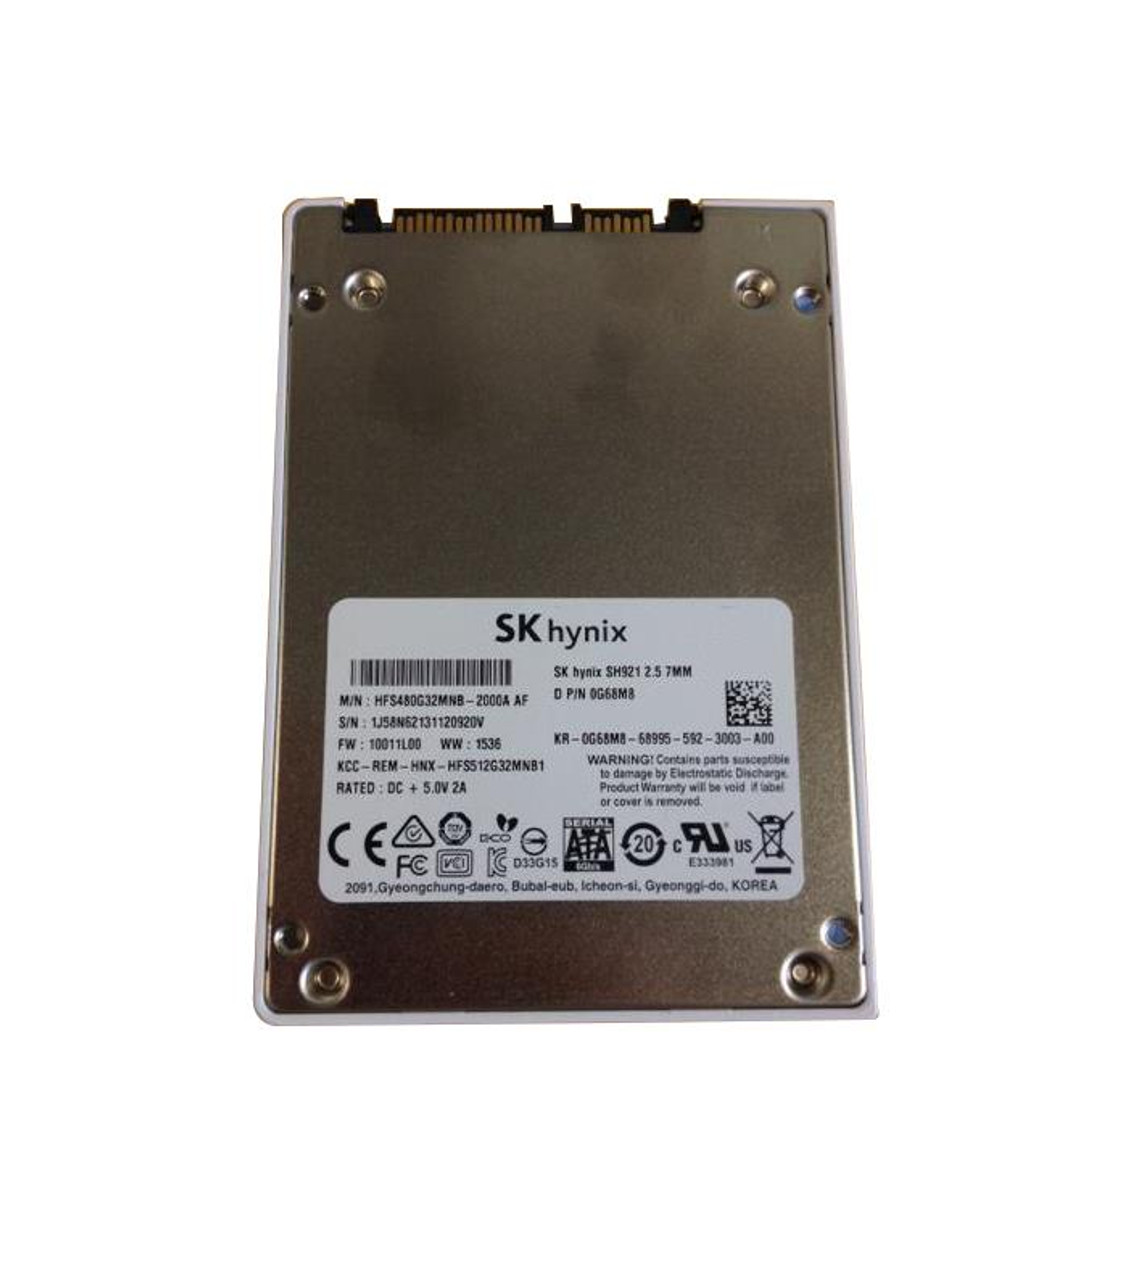 G68M8 Dell 512GB MLC SATA 6Gbps 2.5-inch Internal Solid State Drive (SSD)